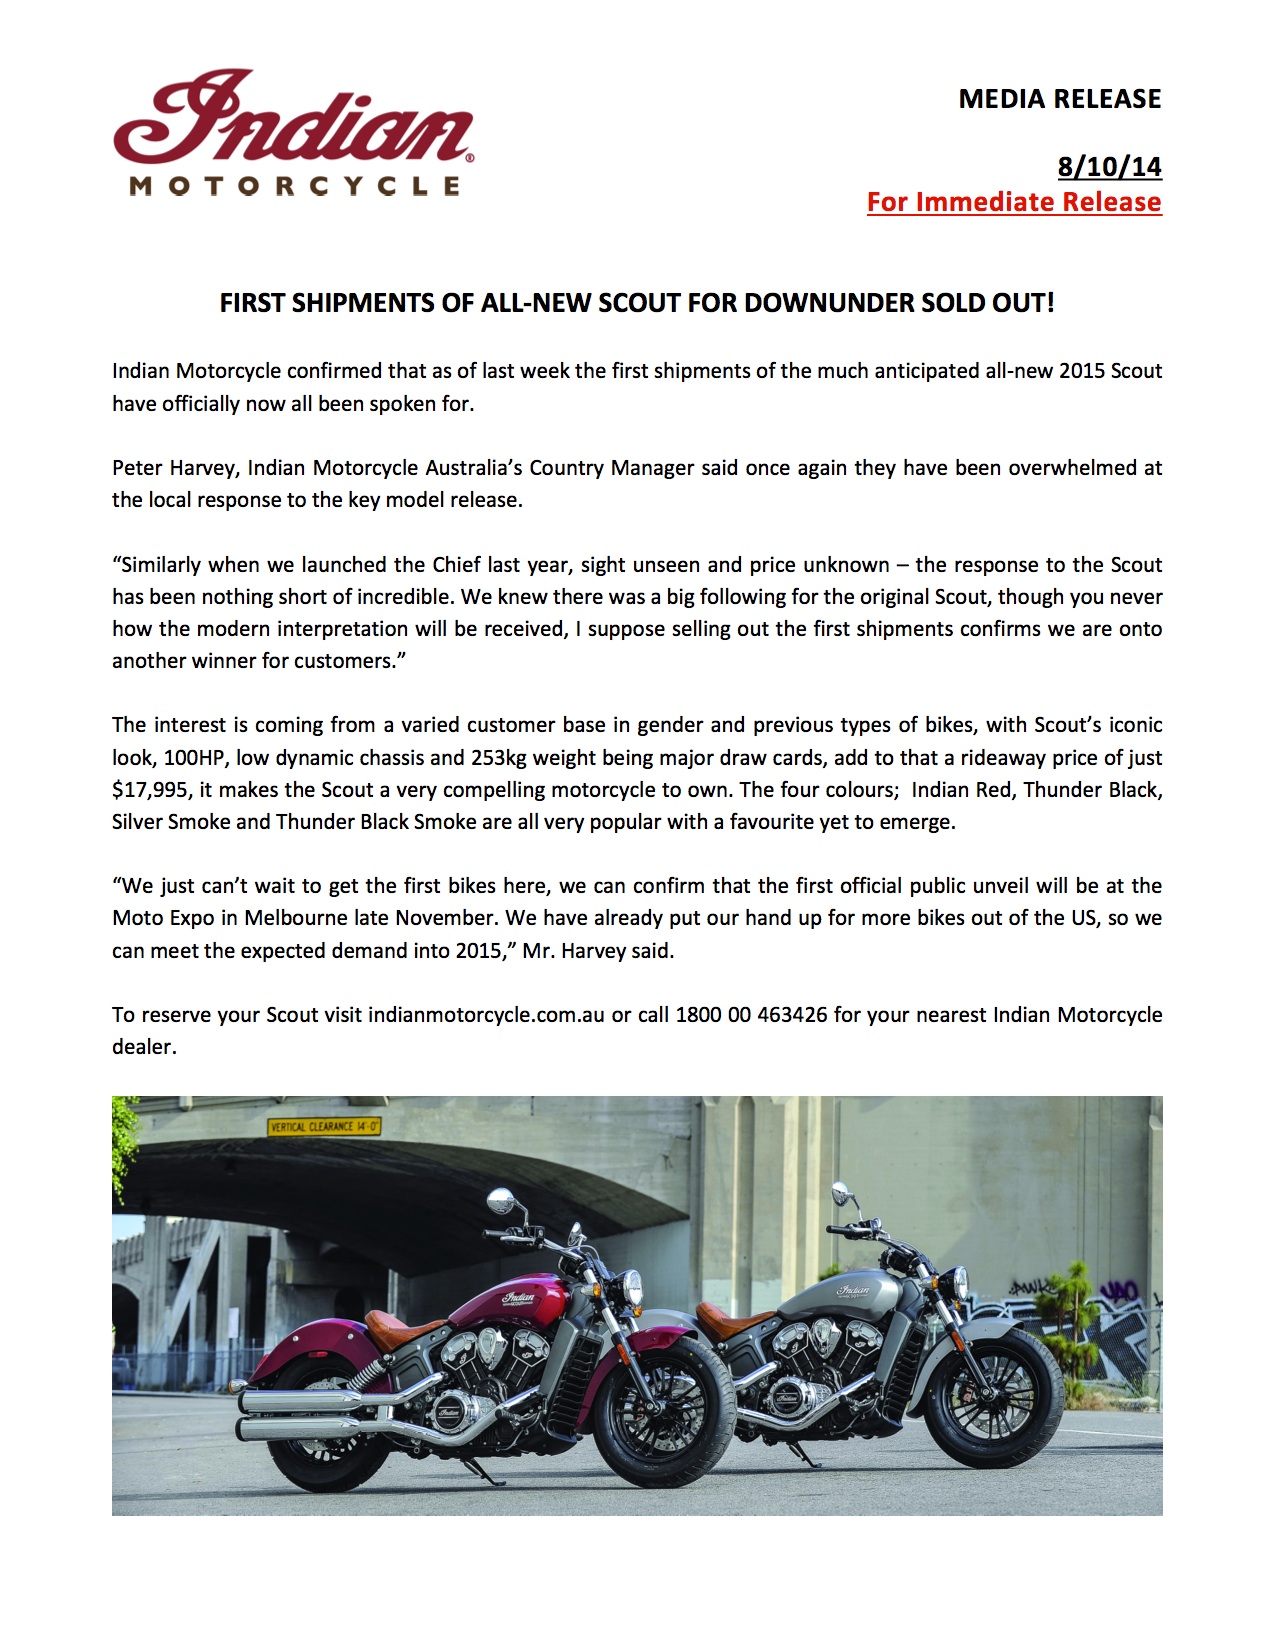 Indian Motorcycle Australia Press Release - Scout First Shipments Sold Out